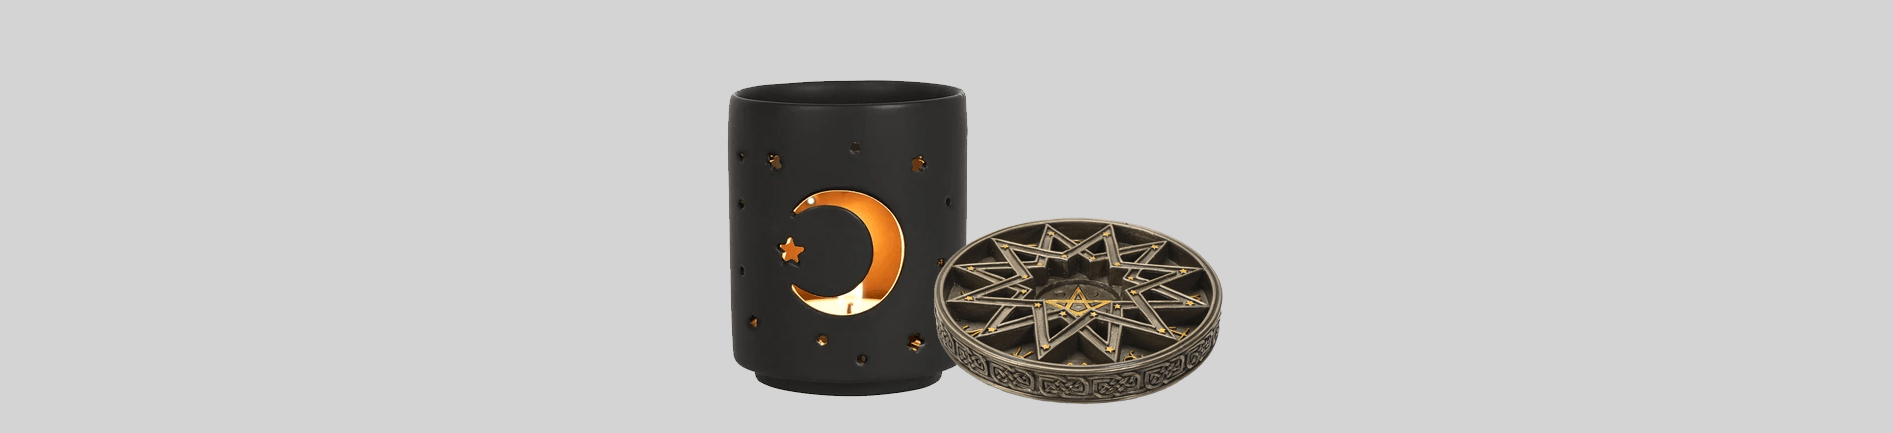 CANDLE HOLDERS - hotRAGS.com